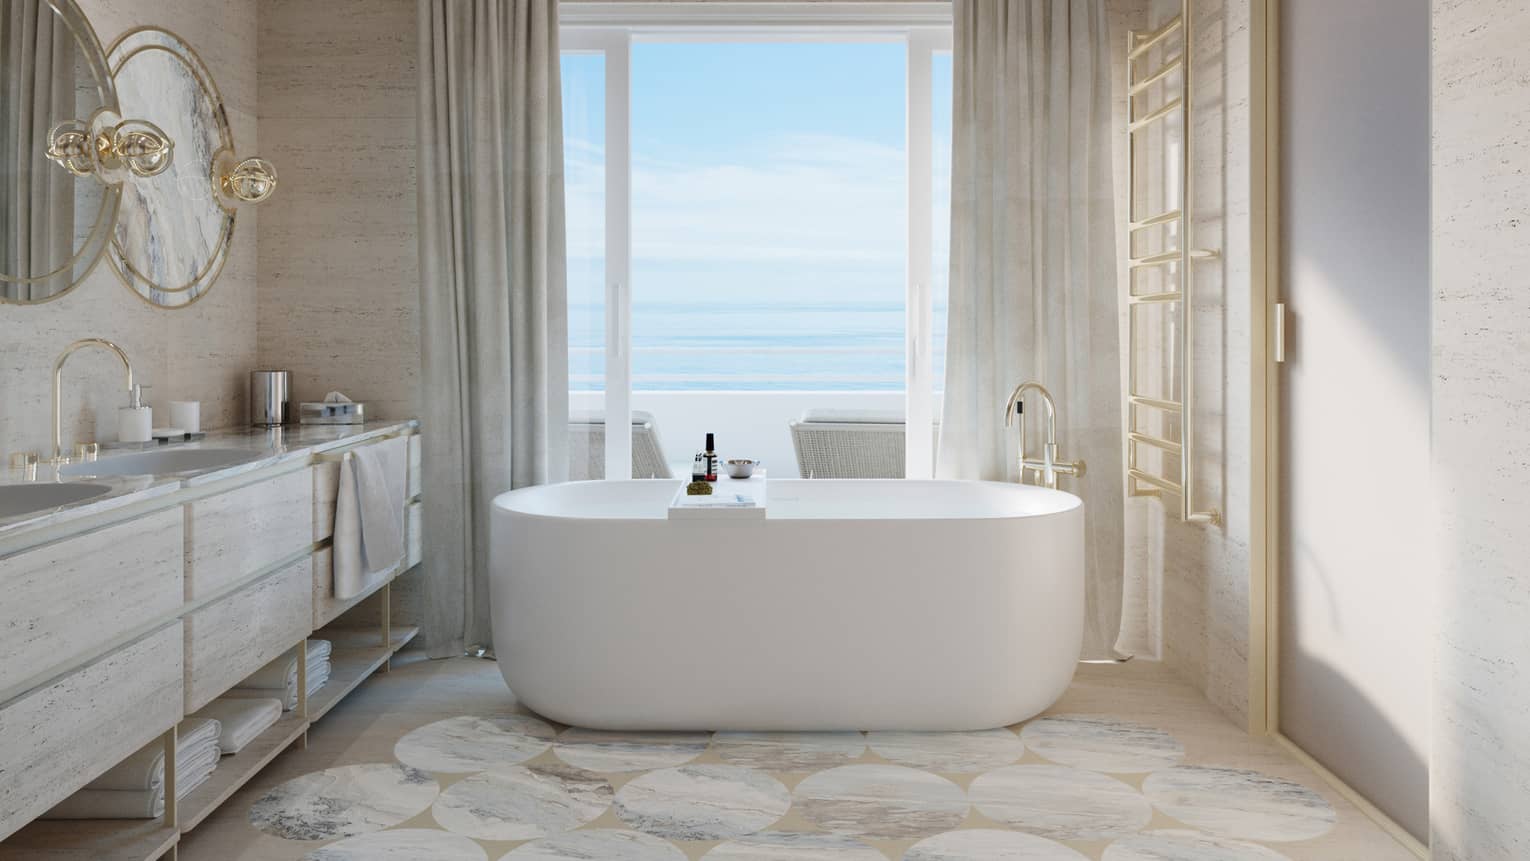 Grand bathroom with chandelier and freestanding tub by the window looking out to the sea